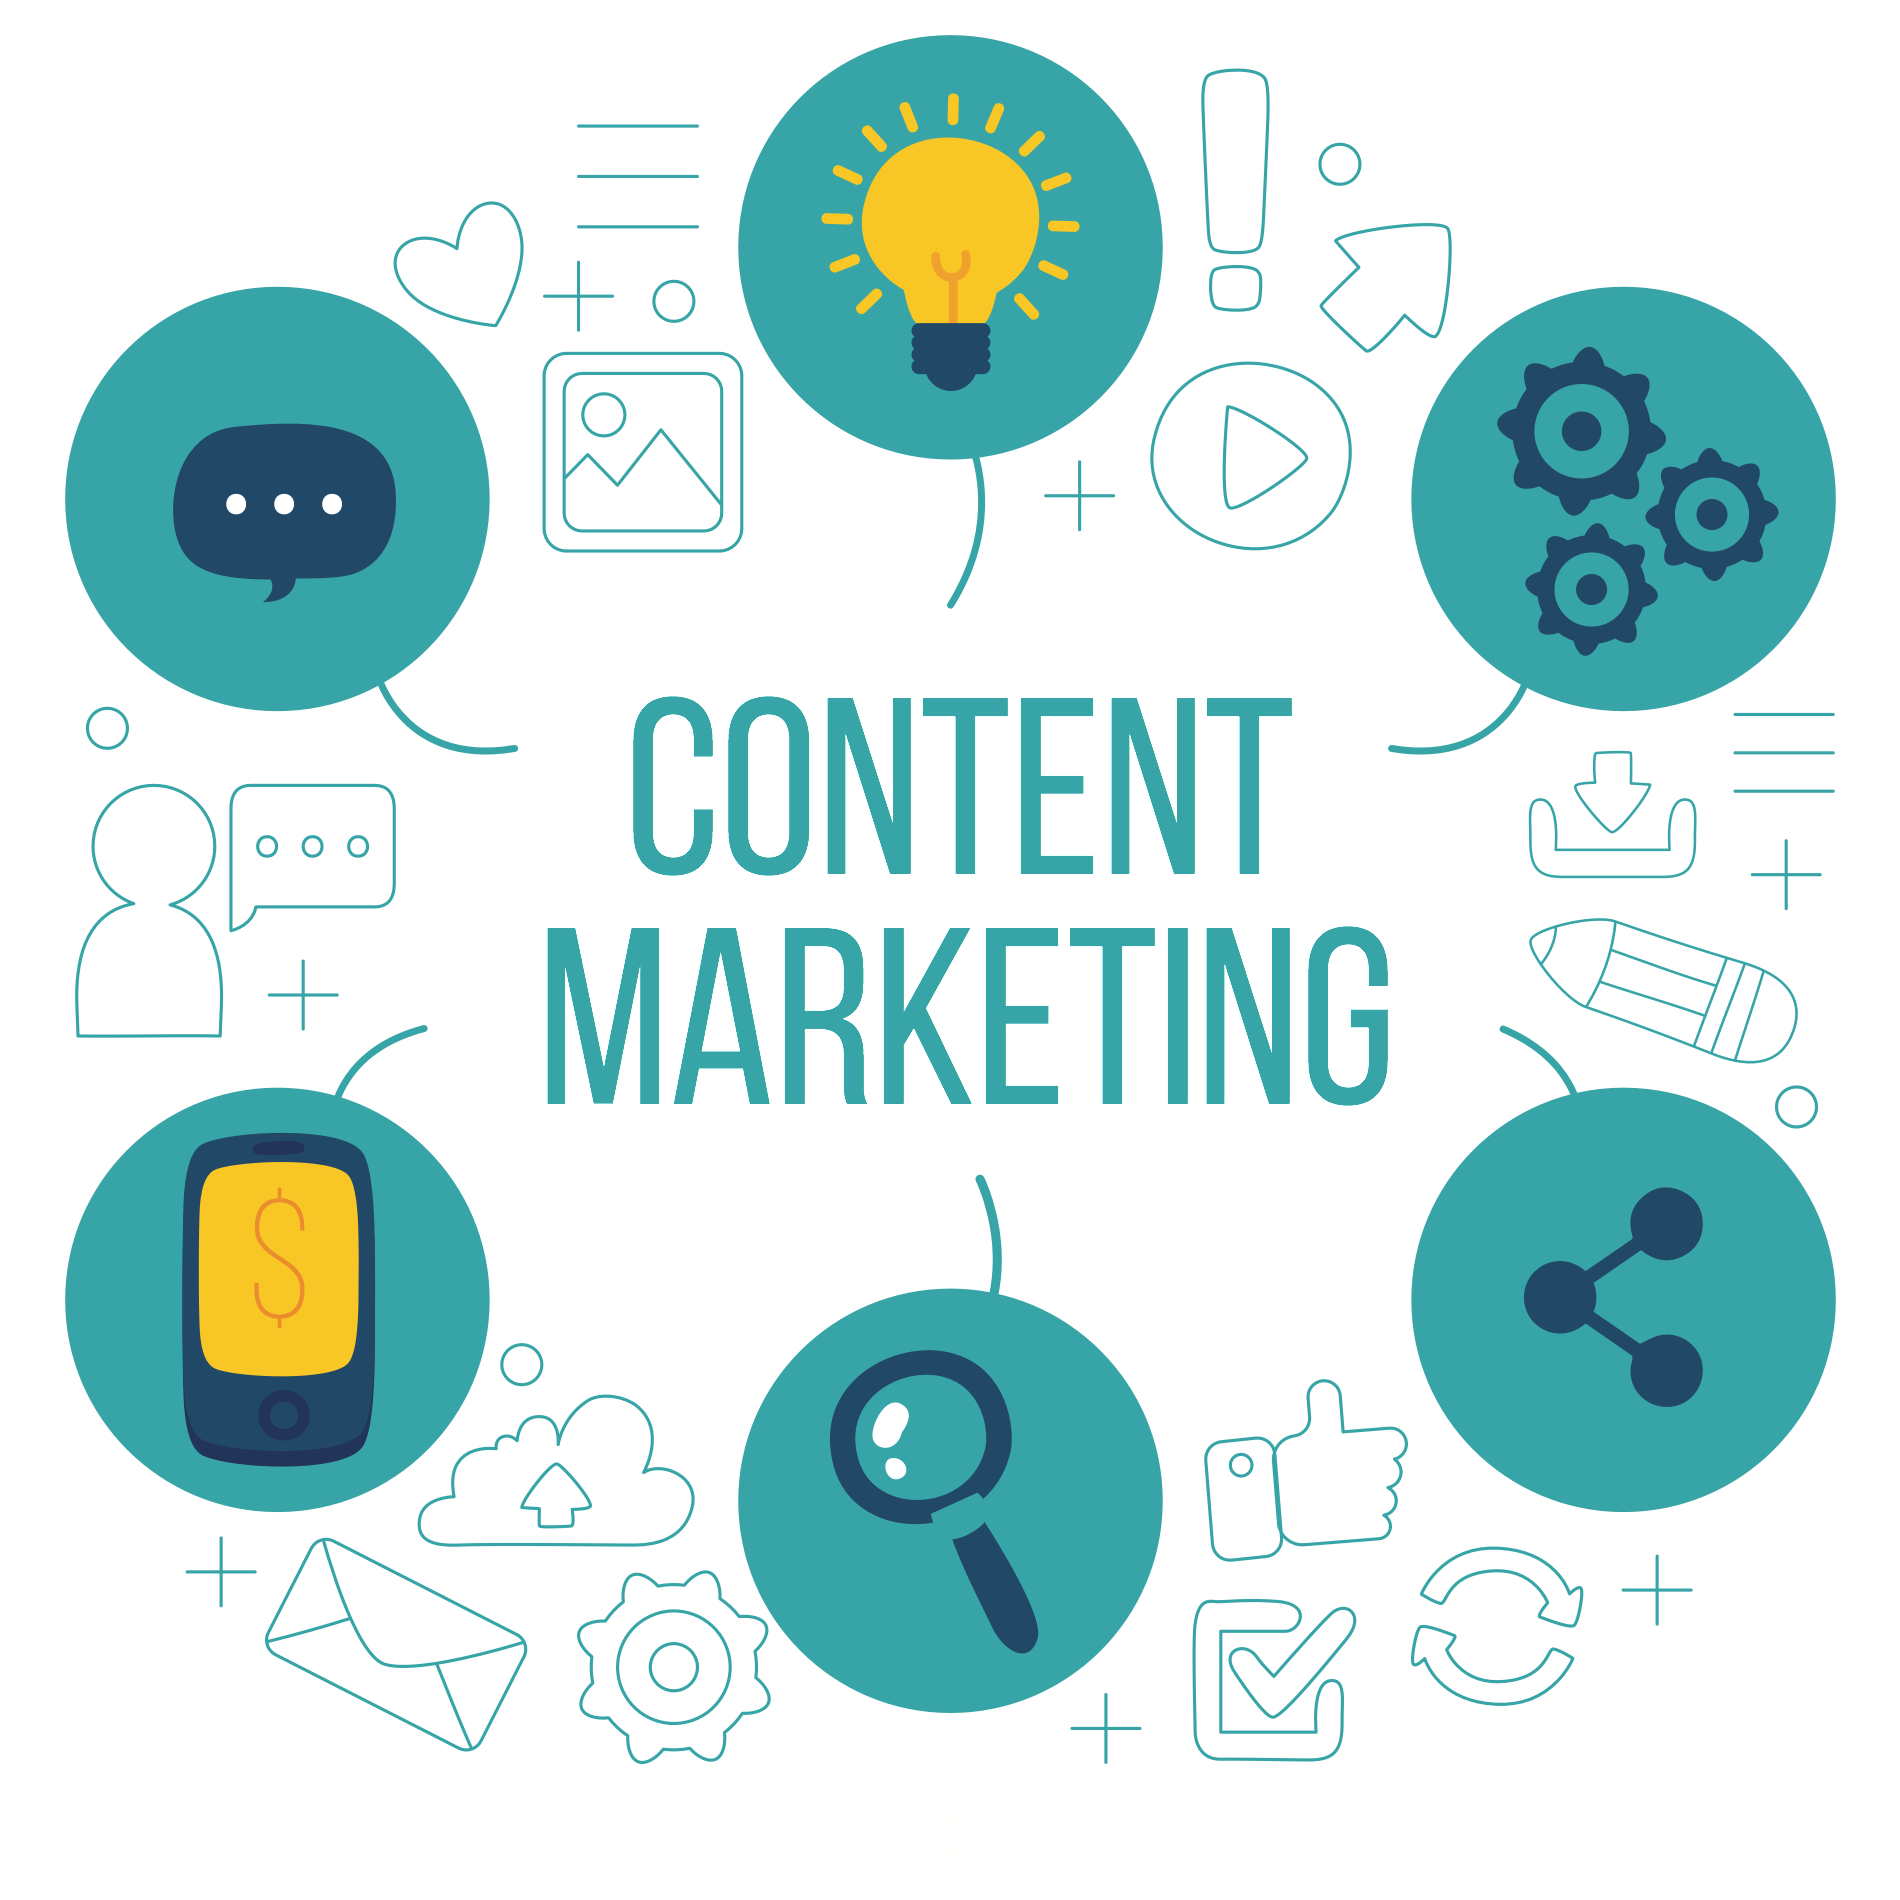 What Is Content Marketing Services